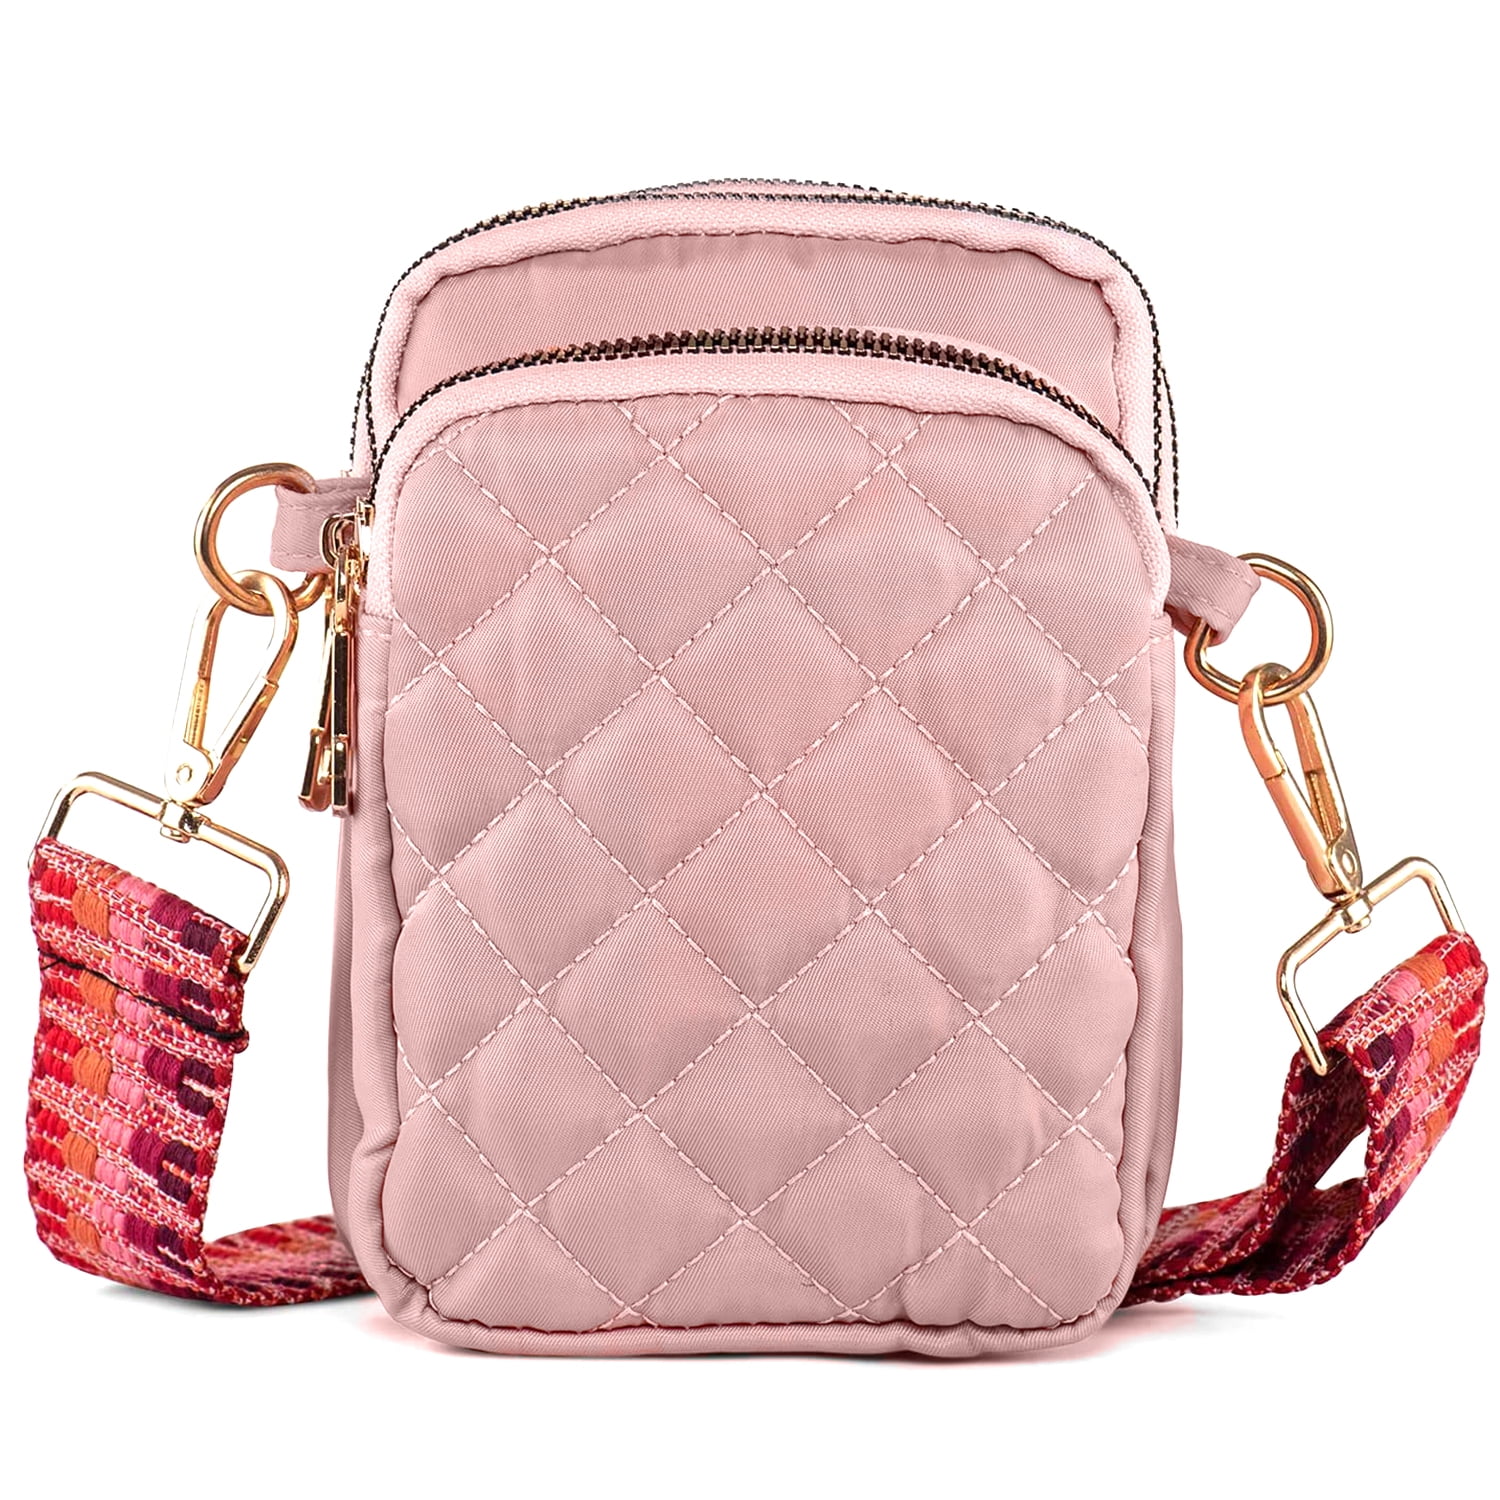 Ladies Cross Body Bag, Shoulder Bag with Adjustable Wide Strap and Chain-  Multipurpose Shoulder & Crossbody Bags for Women(Pink)